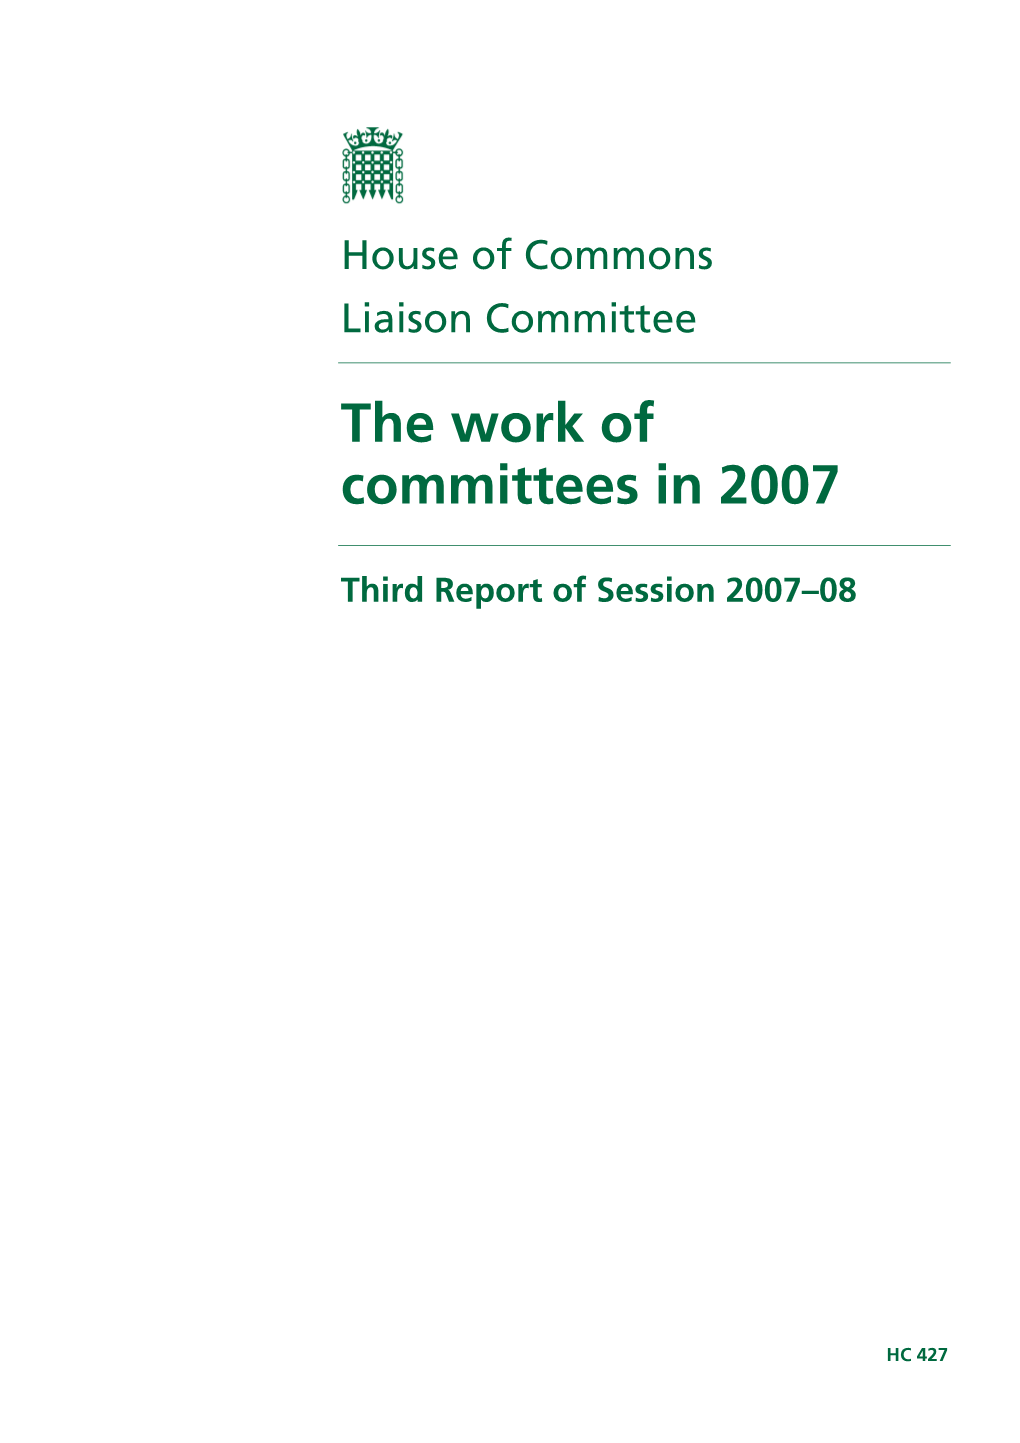 The Work of Committees in 2007